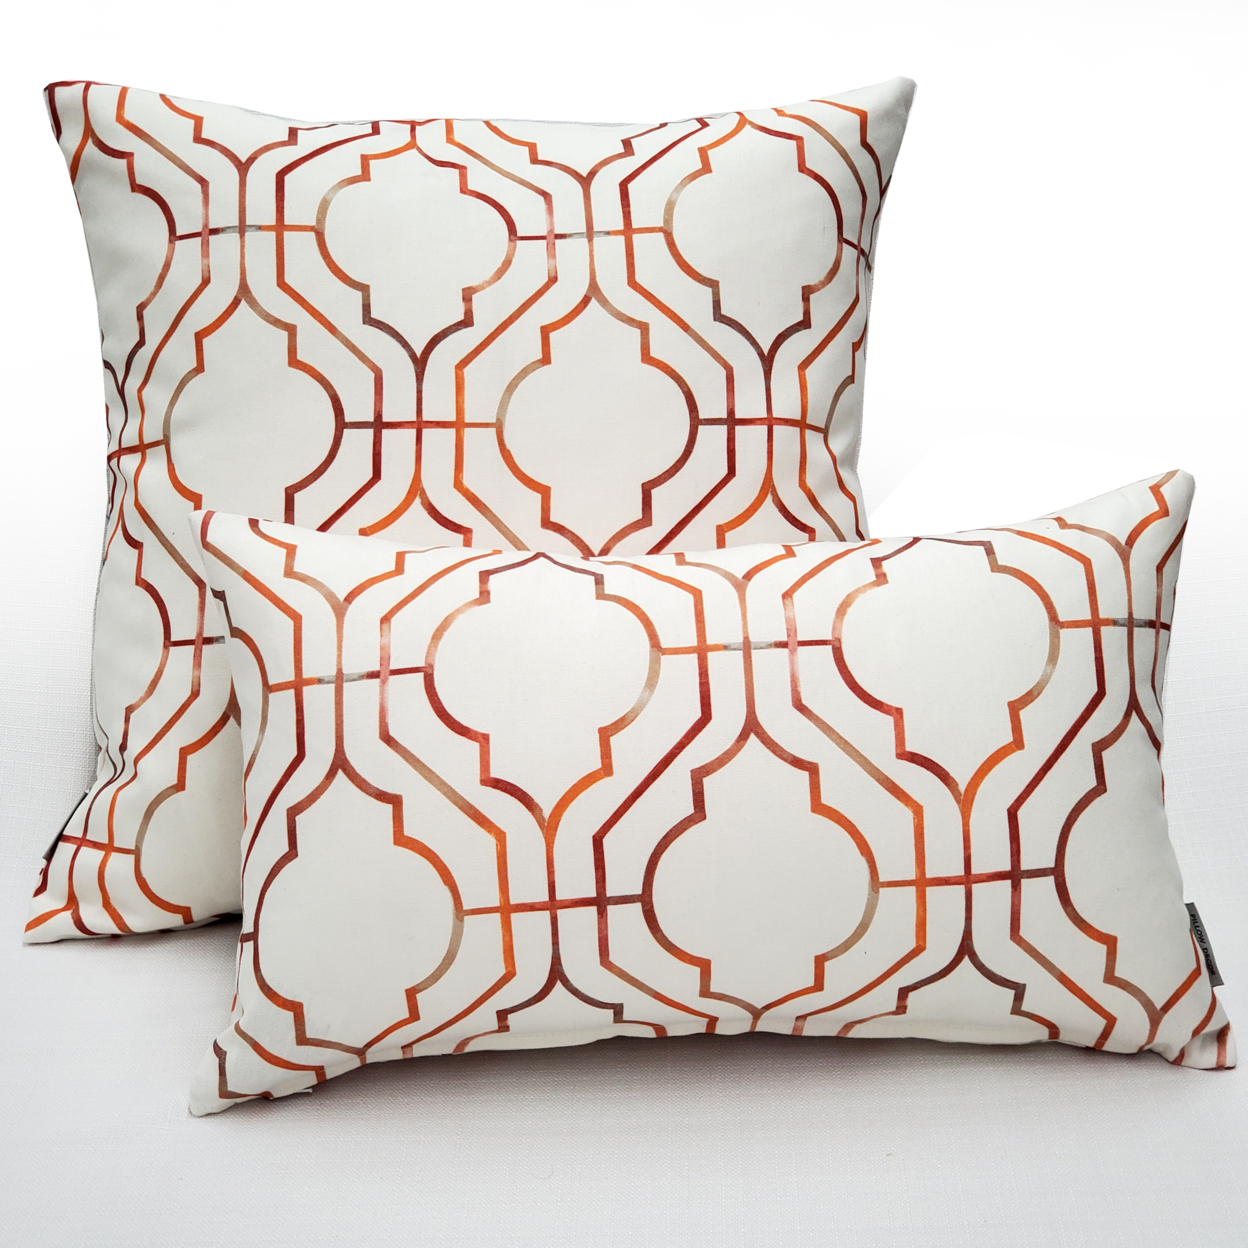 Biltmore Gate Orange Throw Pillow 20x20 Inches Square, Complete Pillow With Polyfill Pillow Insert